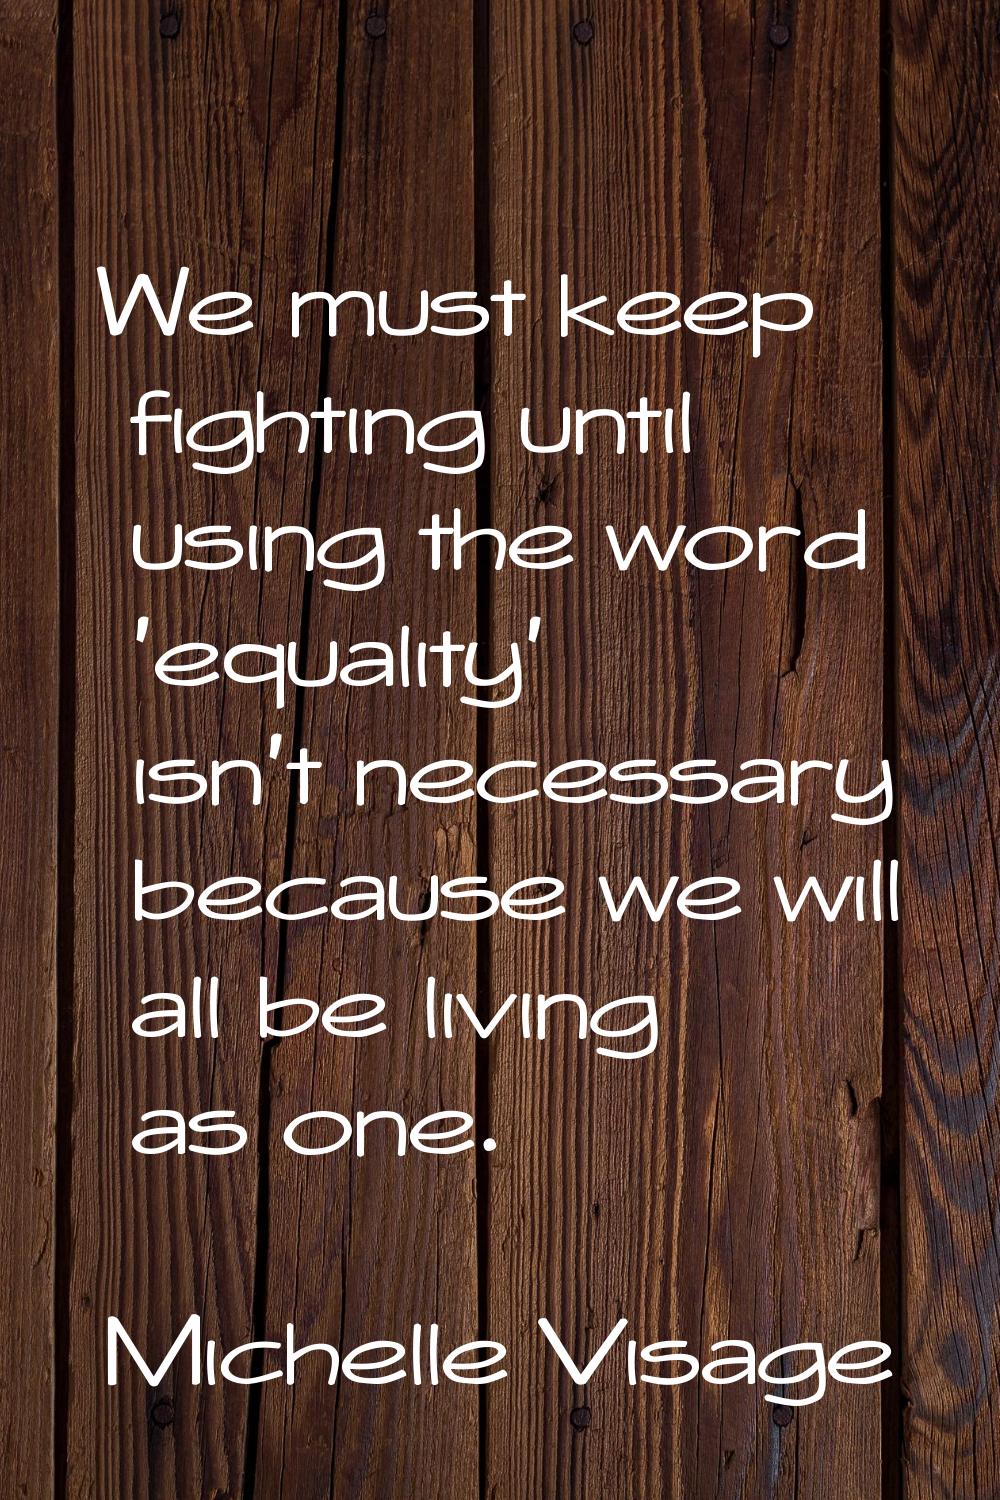 We must keep fighting until using the word 'equality' isn't necessary because we will all be living